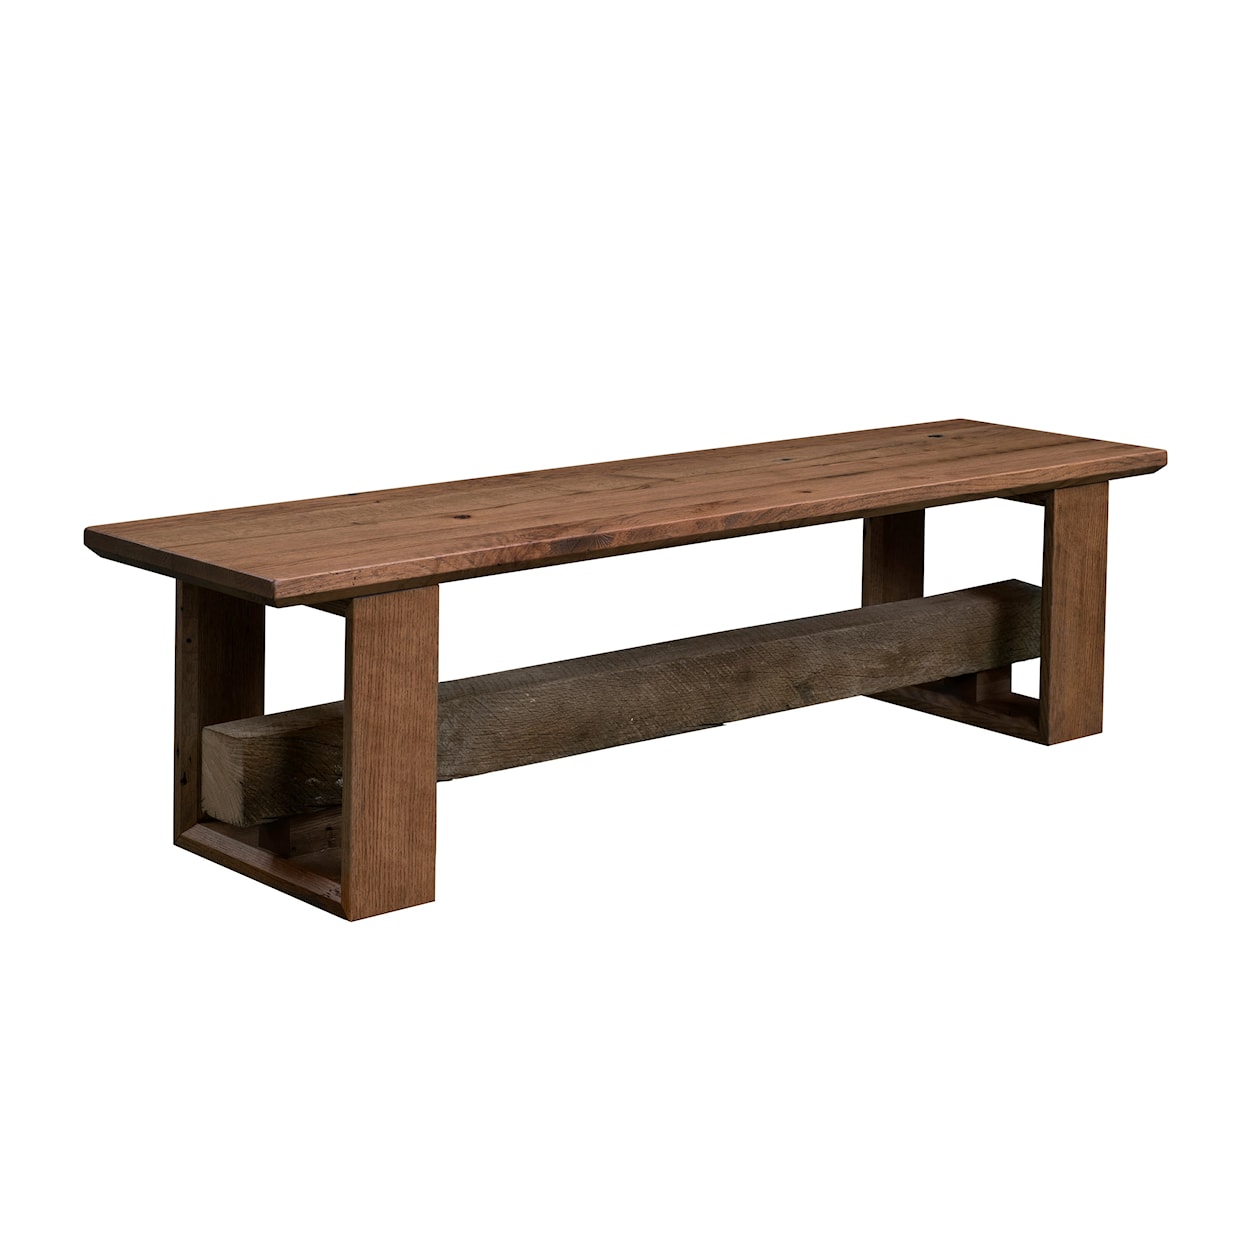 Urban Barnwood Furniture 1869 Dining 84" Accent Bench